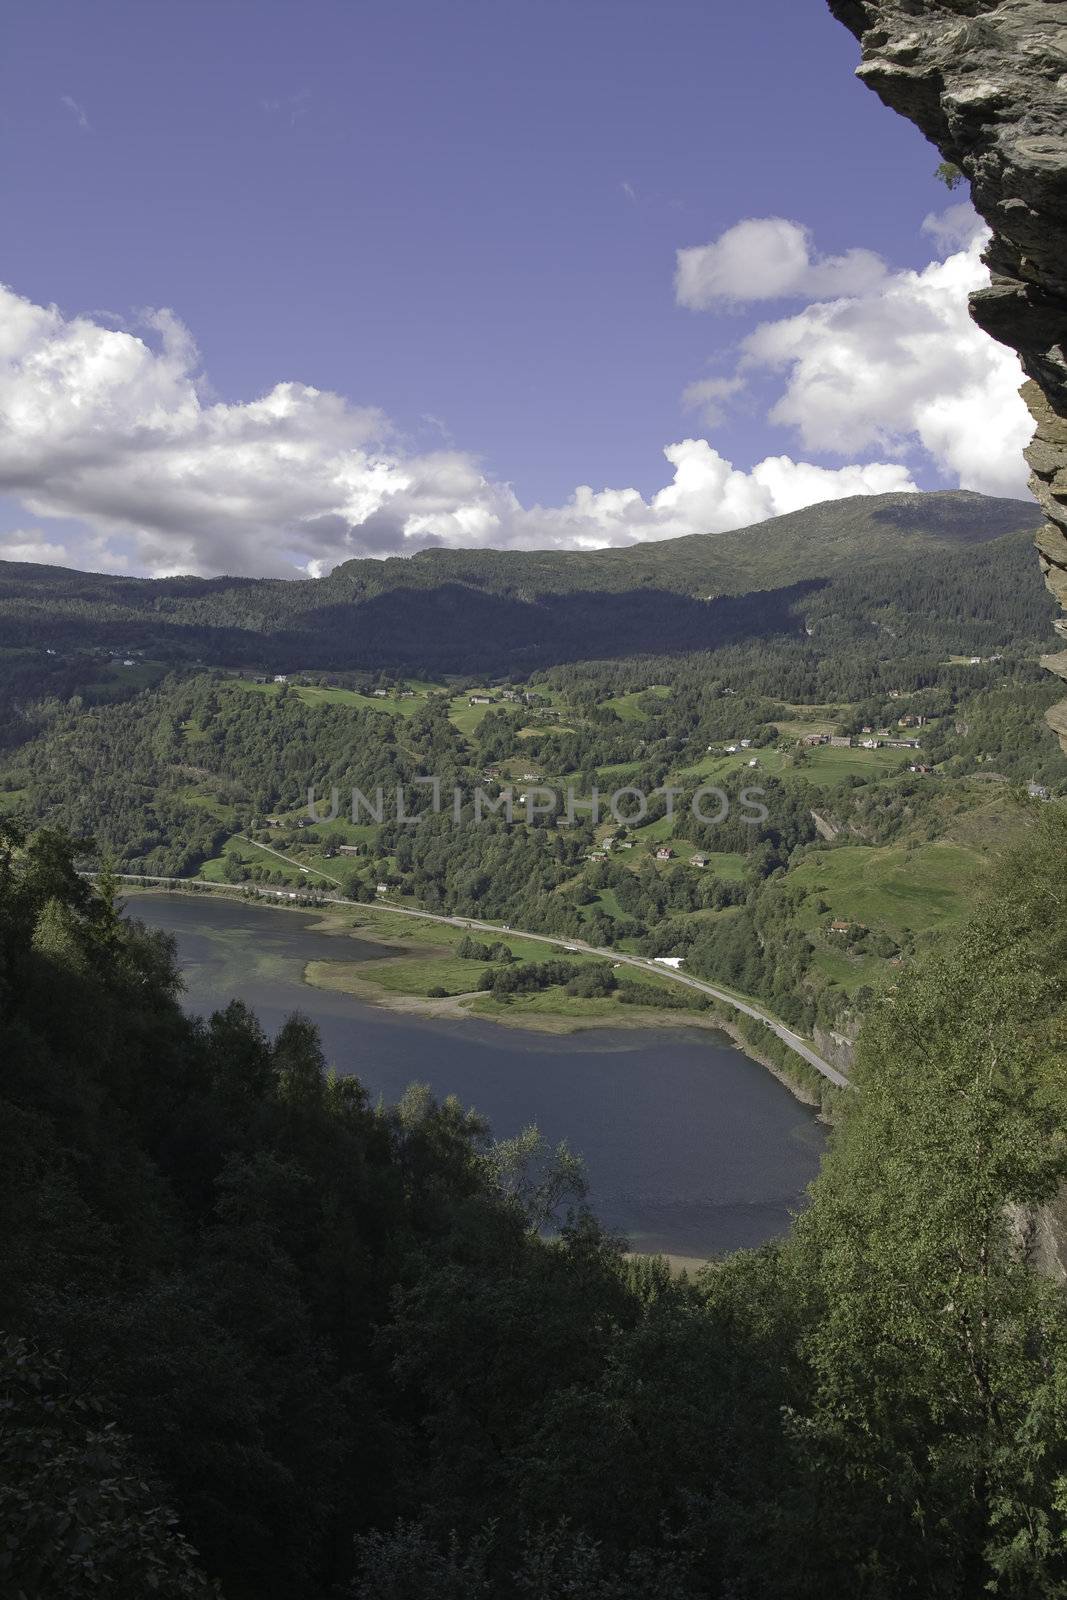 The photo is taken right outside off Voss. You can see the road to Bergen and the beautiful river.